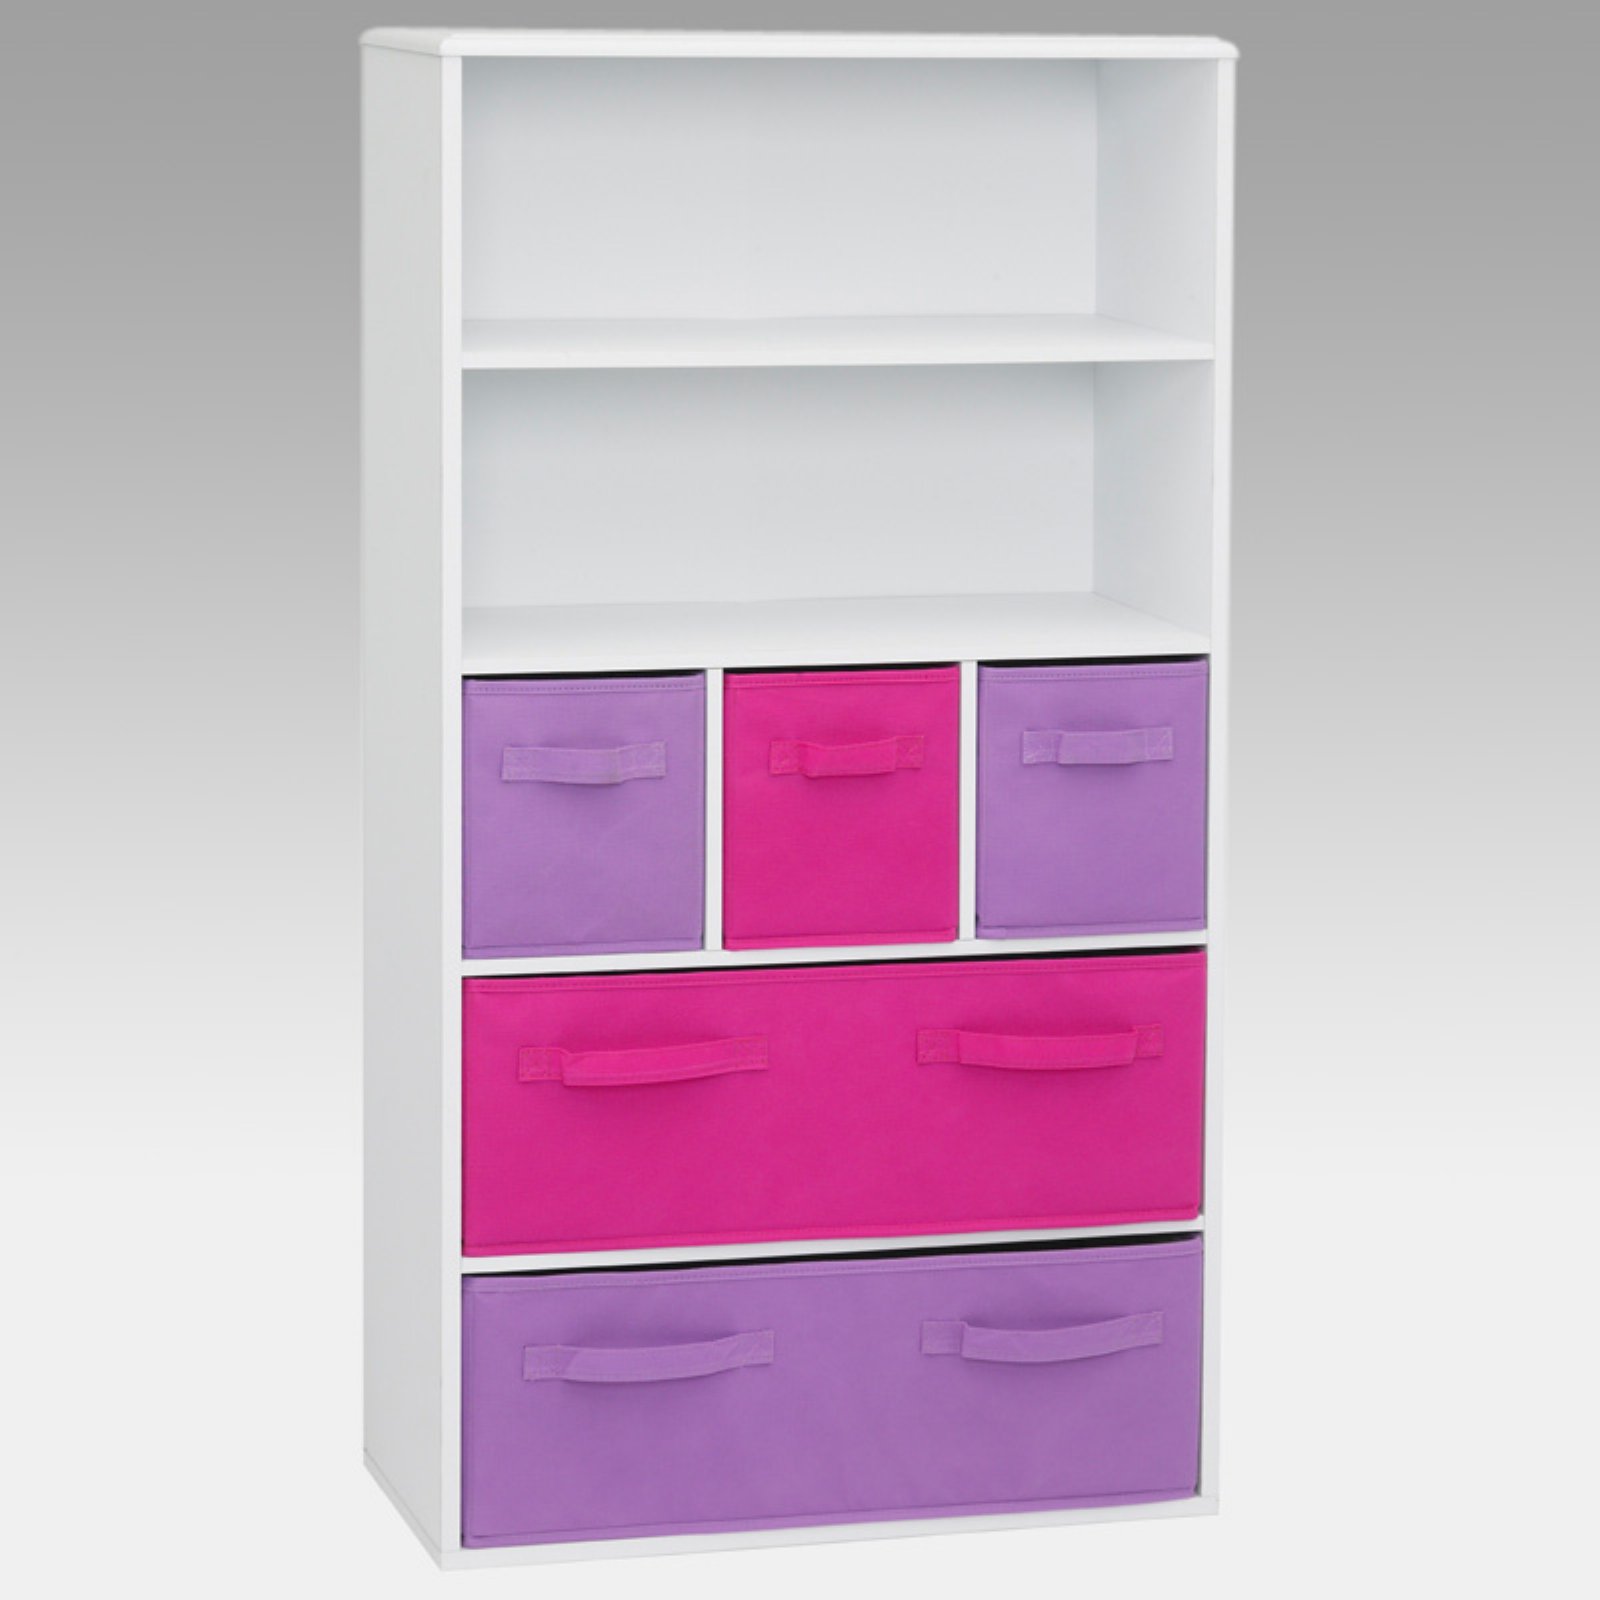 4D Concepts Kids Bookshelf with Fabric Storage Bins, Multiple Finishes - image 1 of 3